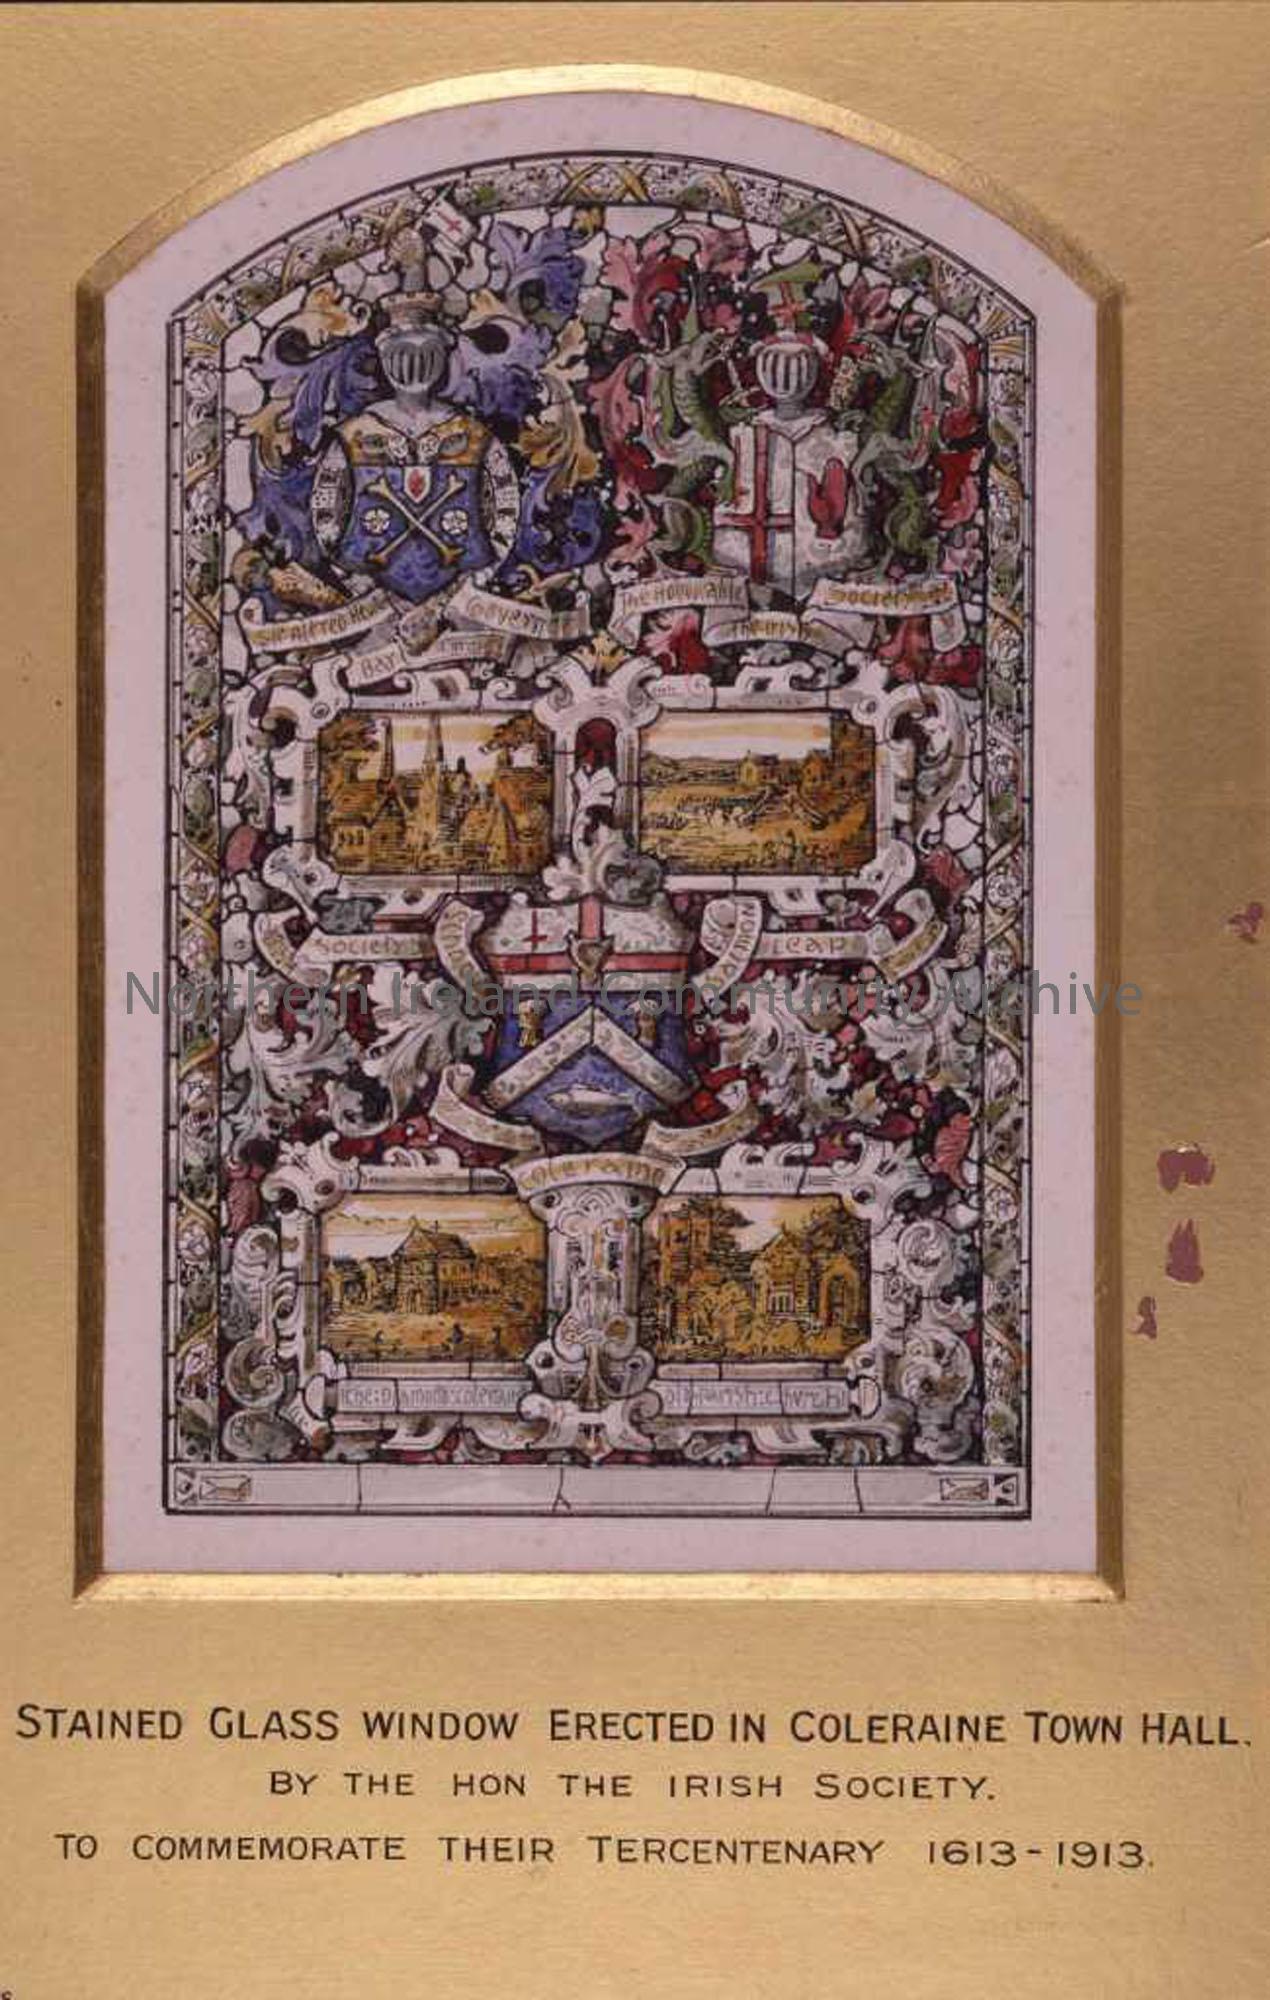 Design for The Honourable The Irish Society’s  stained glass window